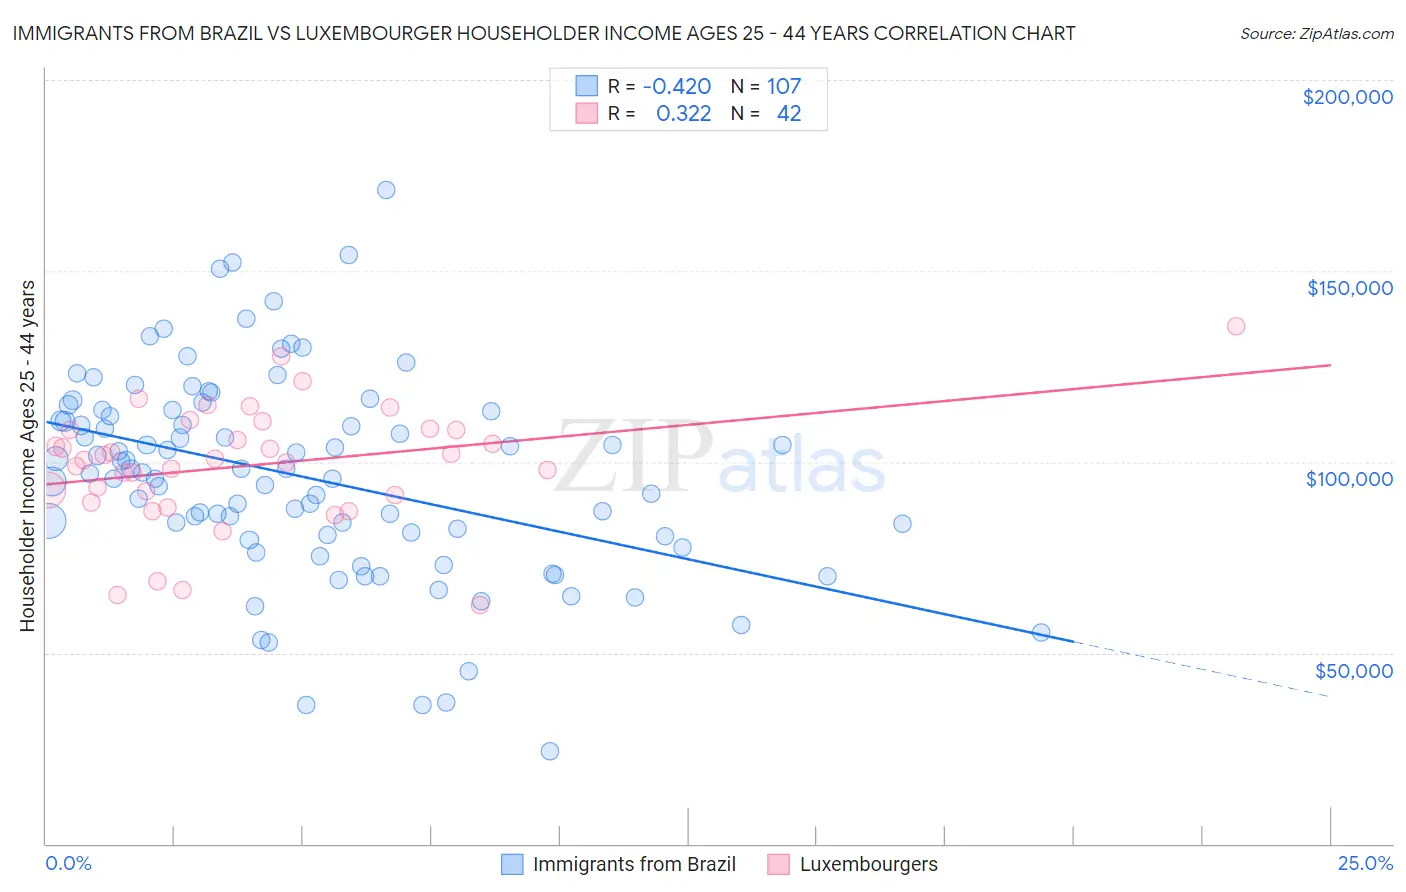 Immigrants from Brazil vs Luxembourger Householder Income Ages 25 - 44 years